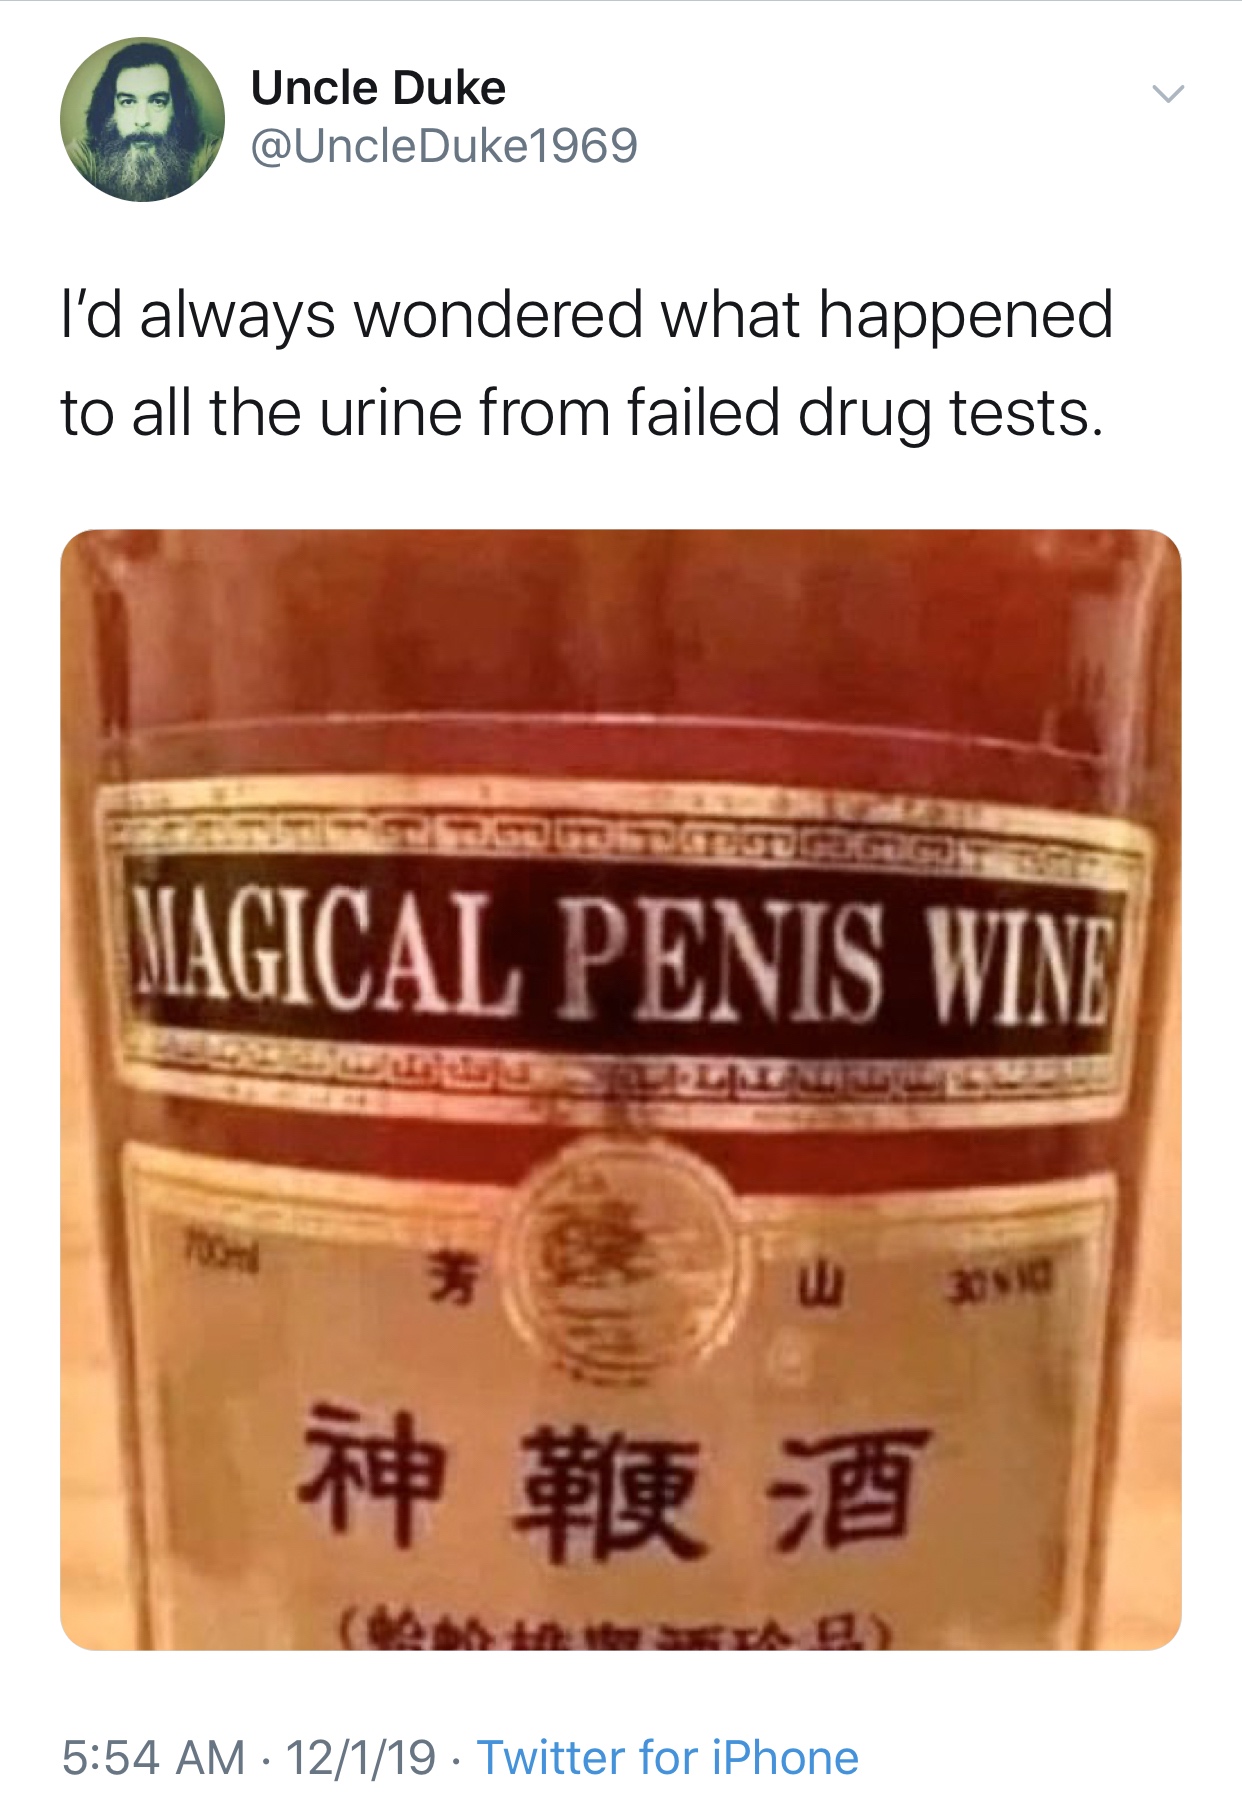 magical penis wine - Uncle Duke l'd always wondered what happened to all the urine from failed drug tests. A Teligrogue Magical Penis Wine 30510 12119 Twitter for iPhone